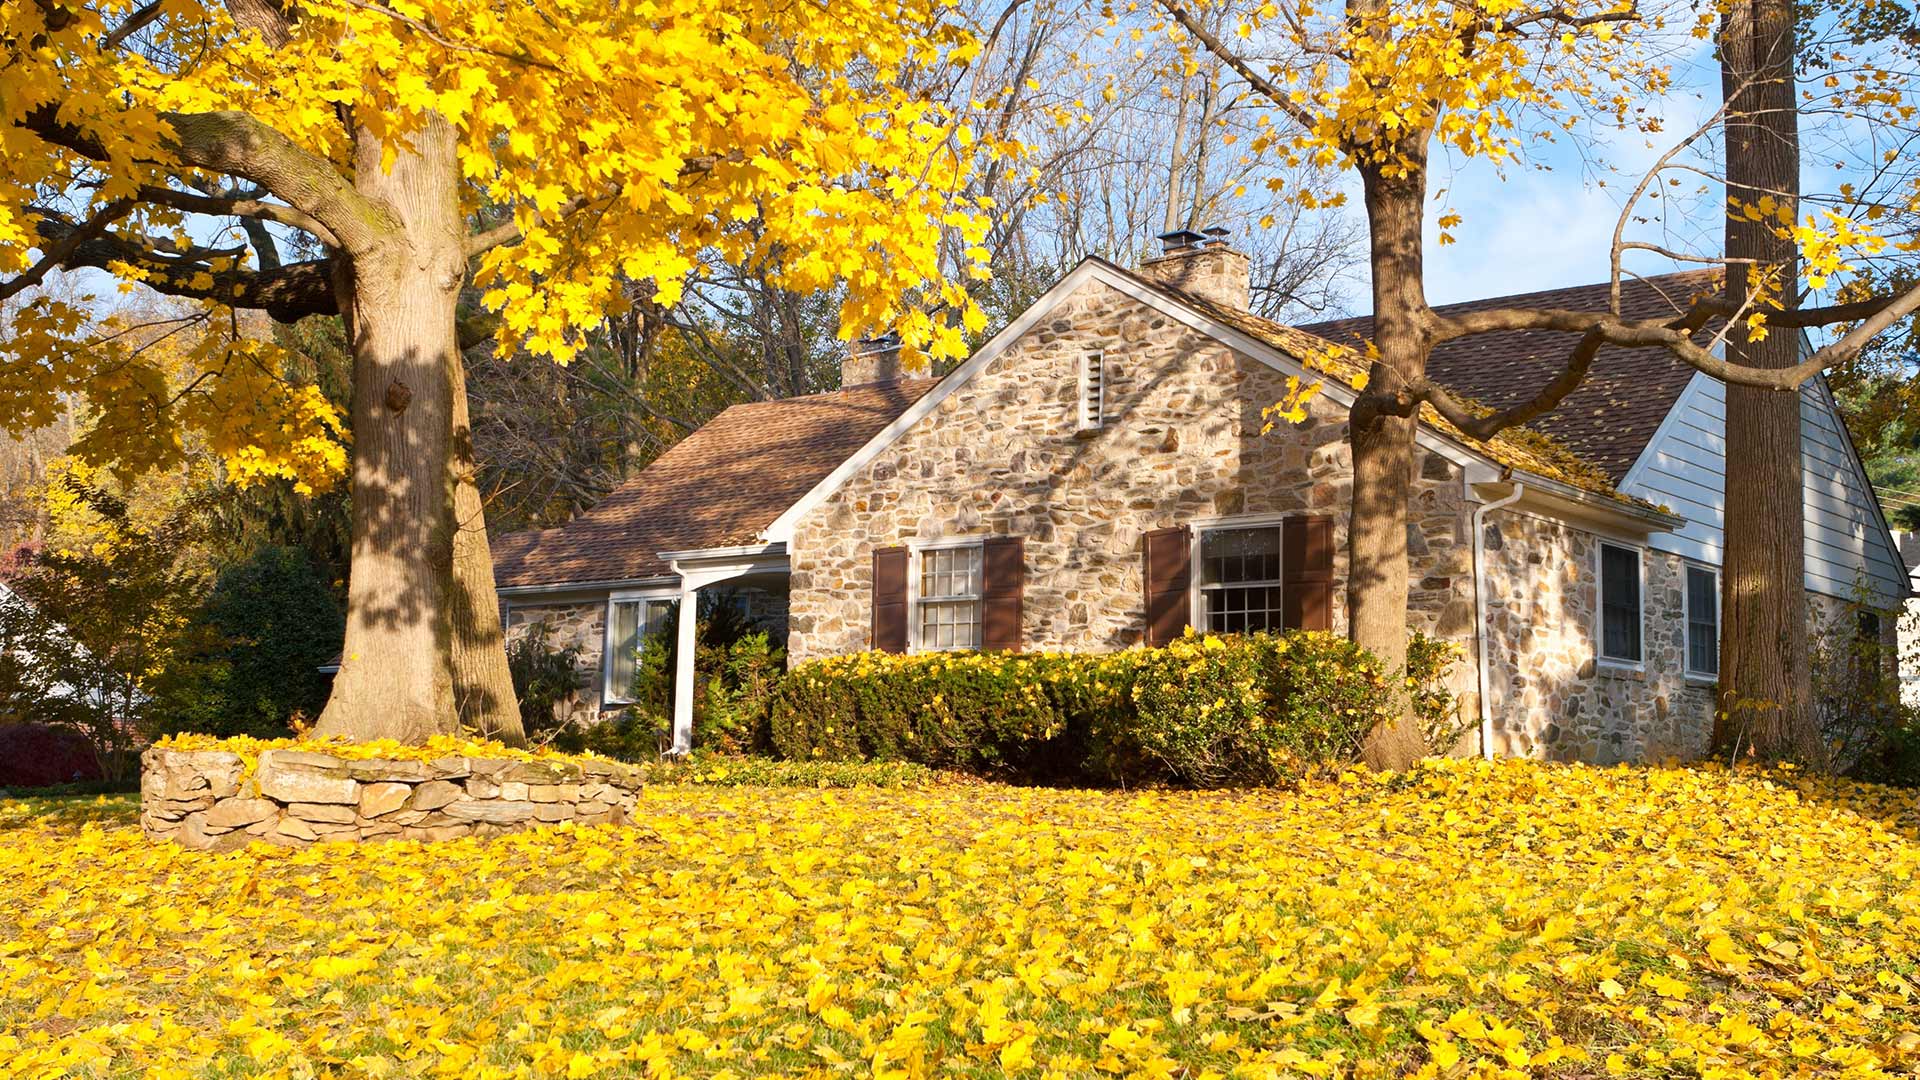 3 Services Your Lawn NEEDS This Fall